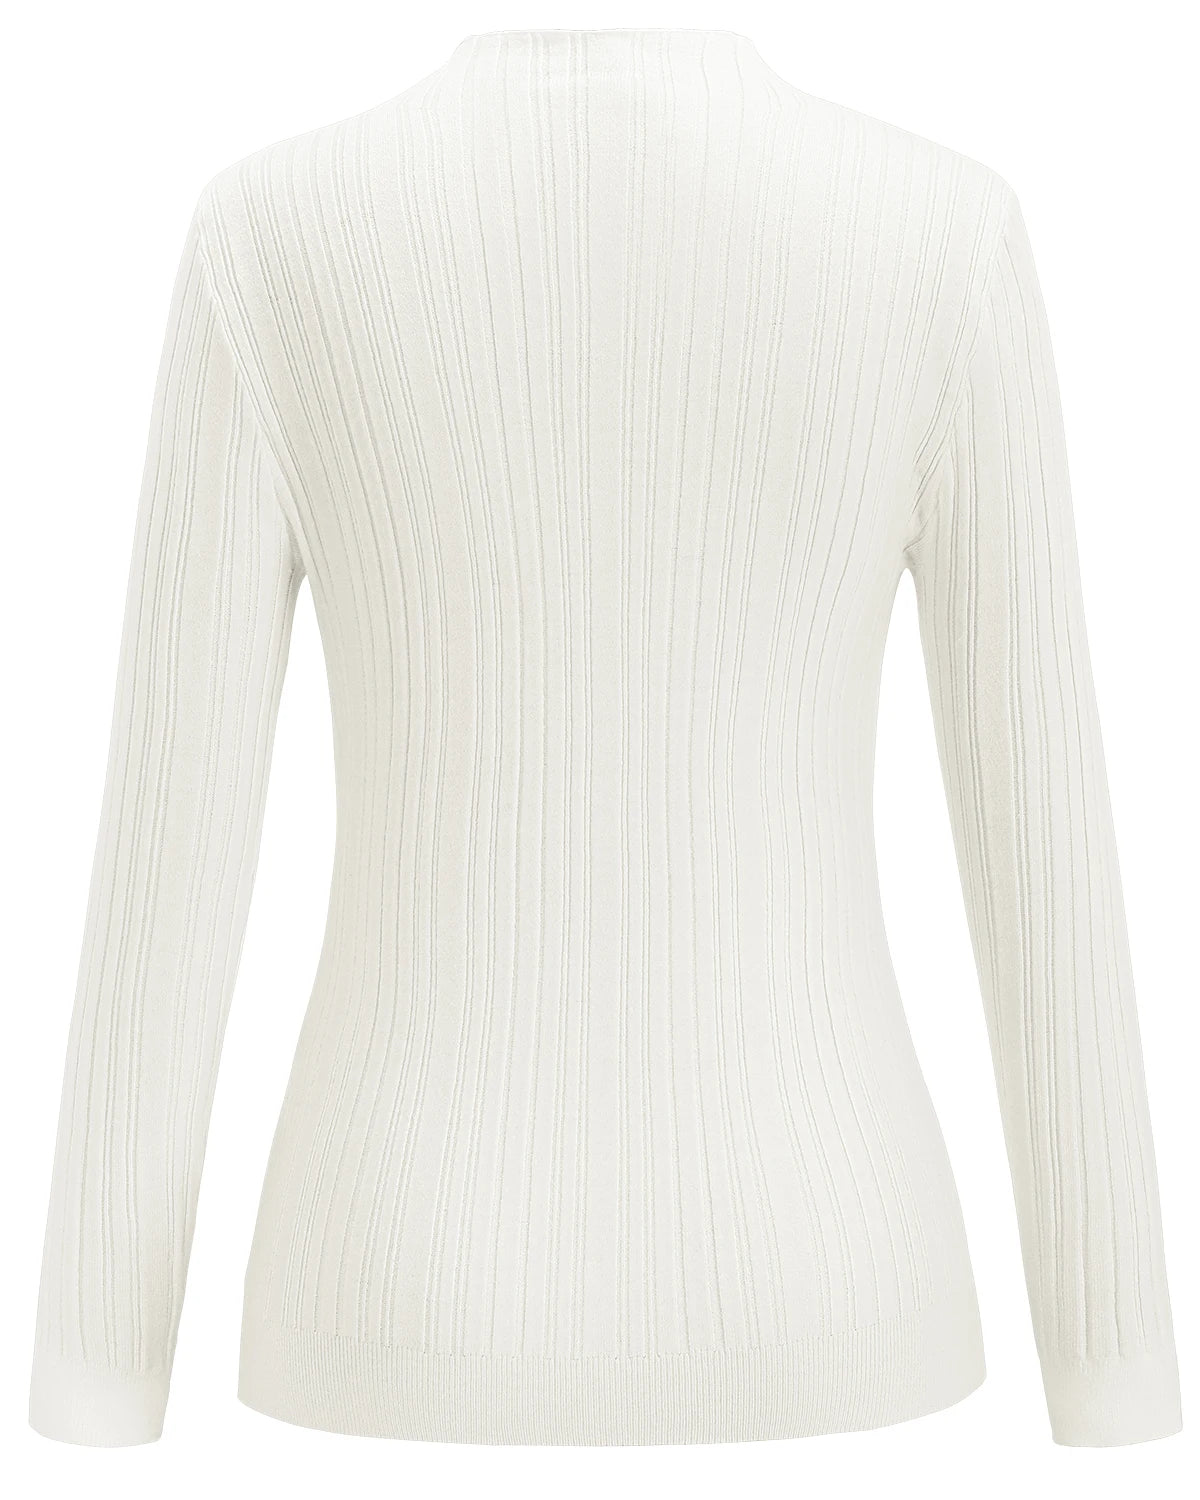 Women's OUGES Lightweight Stretchy Long Sleeve Pullover Cable Knit Mock Turtleneck Sweater